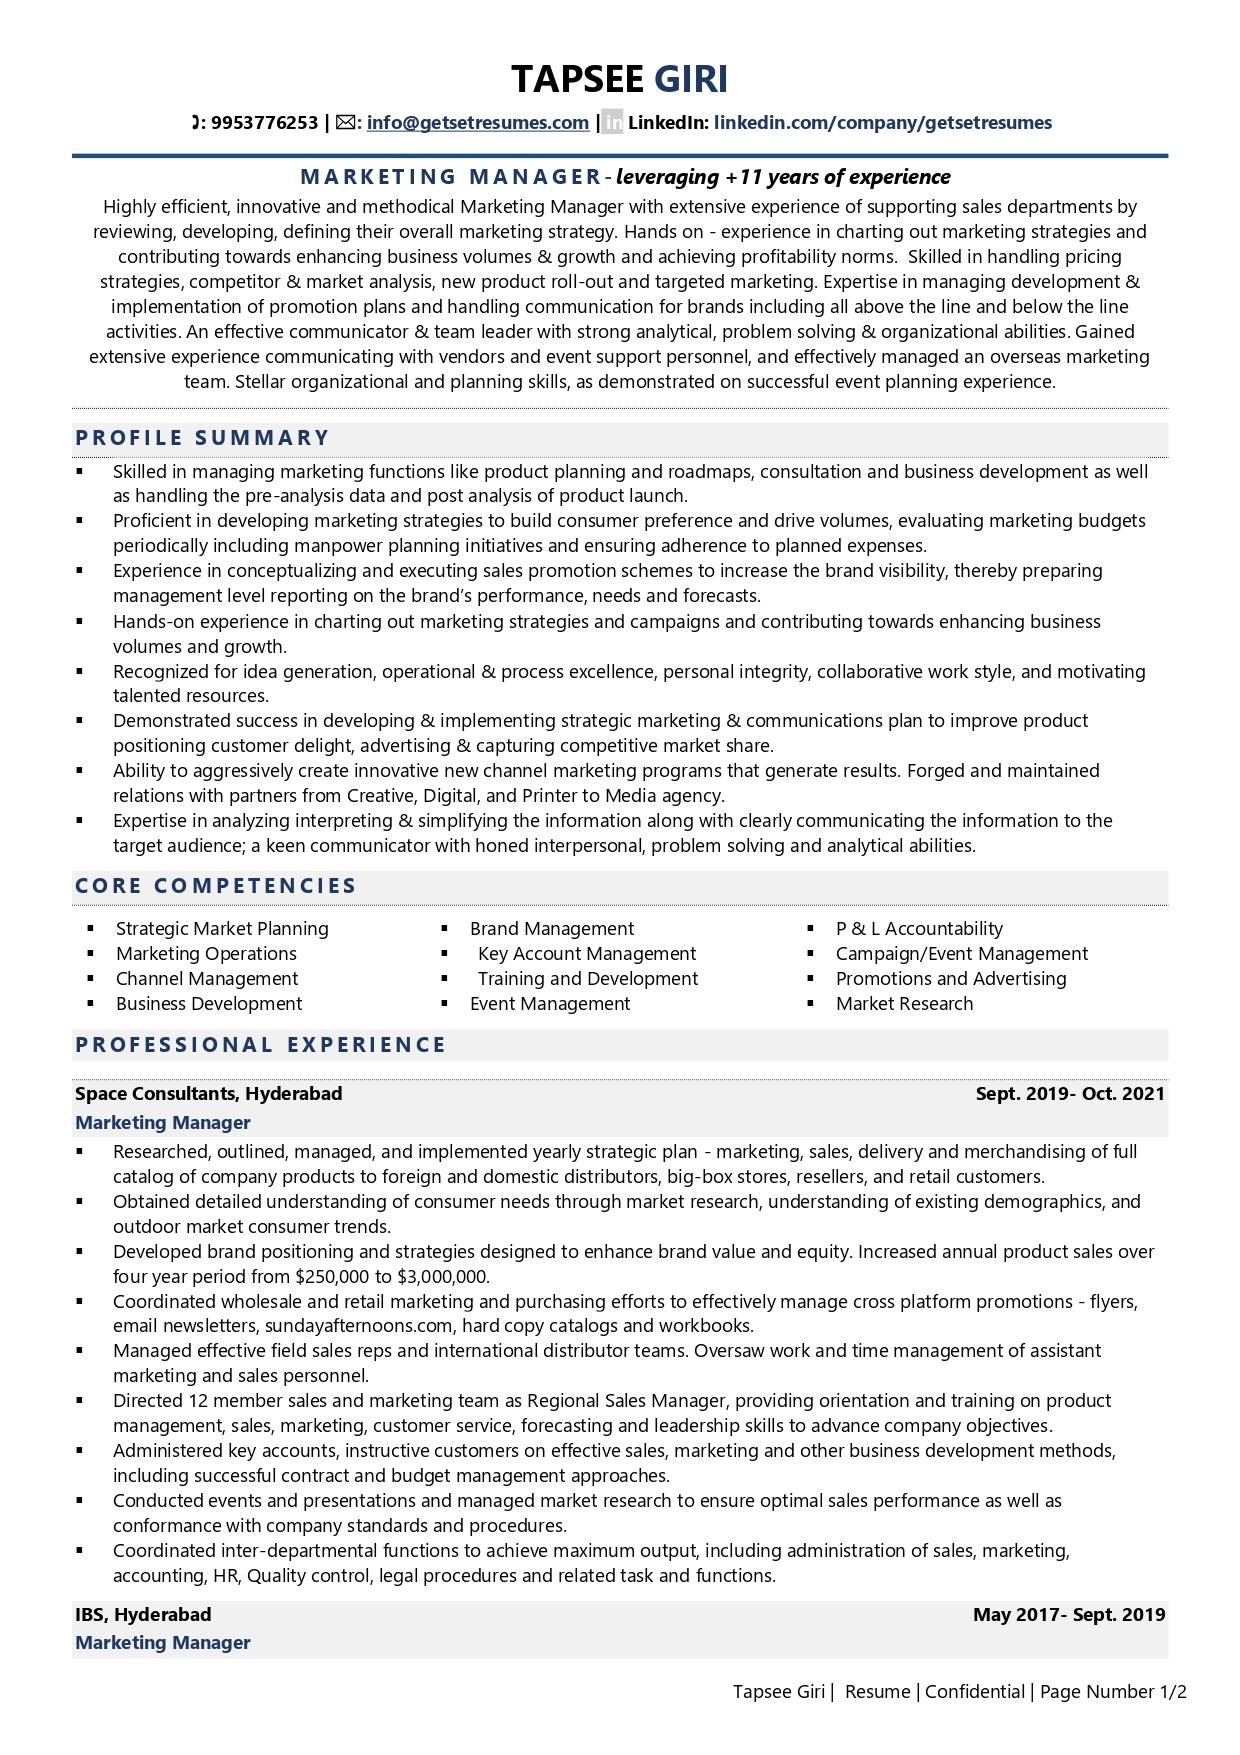 Marketing Manager - Resume Example & Template